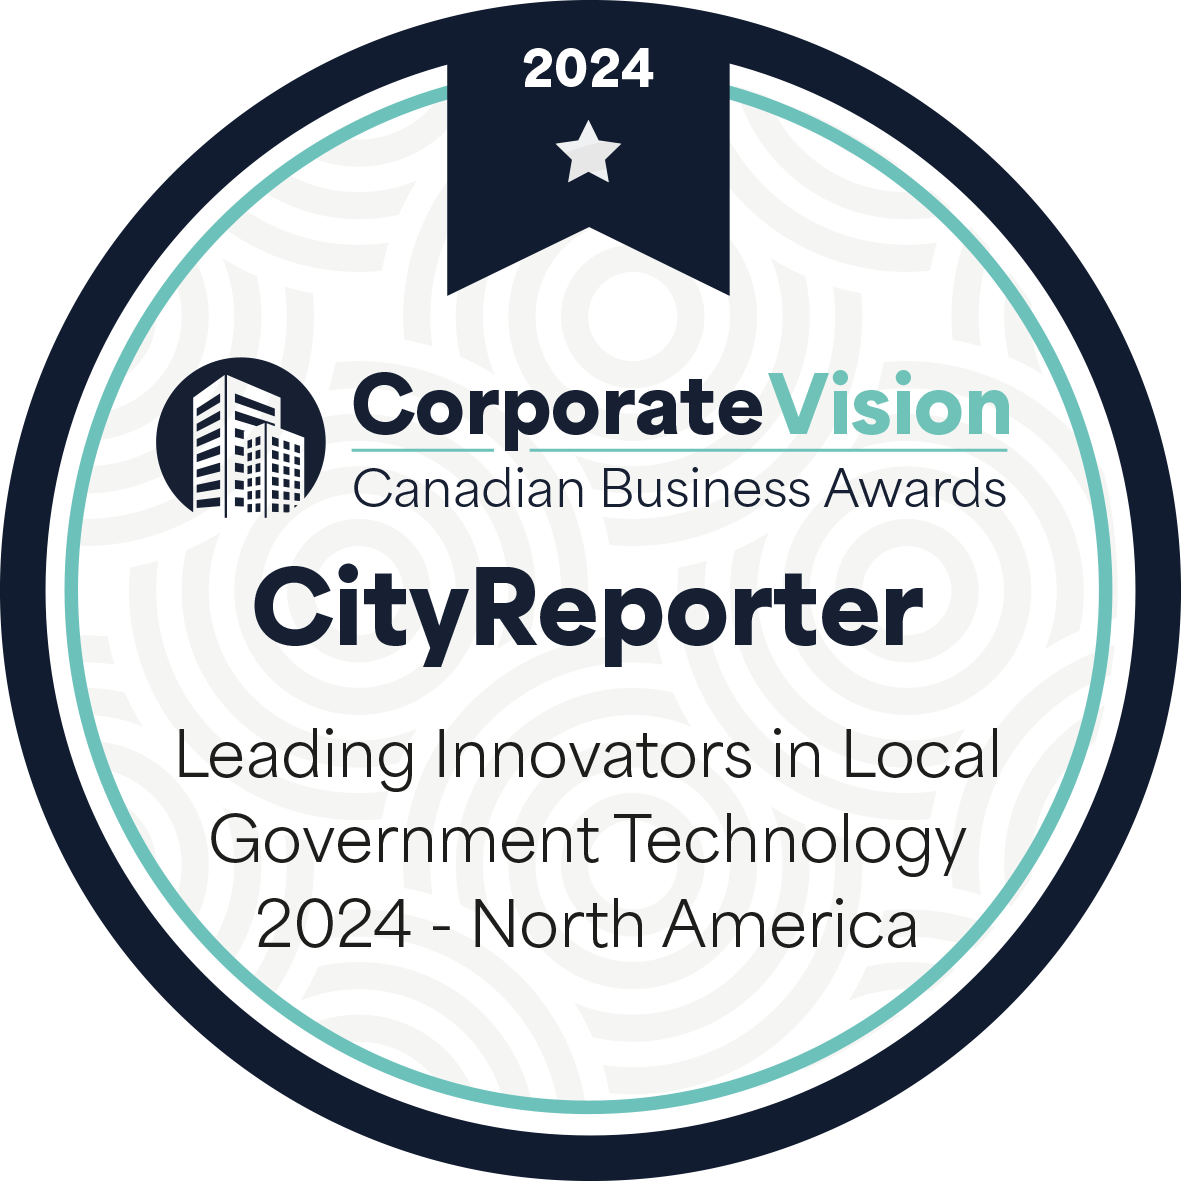 The Corporate Vision Canadian Business Awards badgefor "LEading innovators in Local Government Technology 2024 - North America"